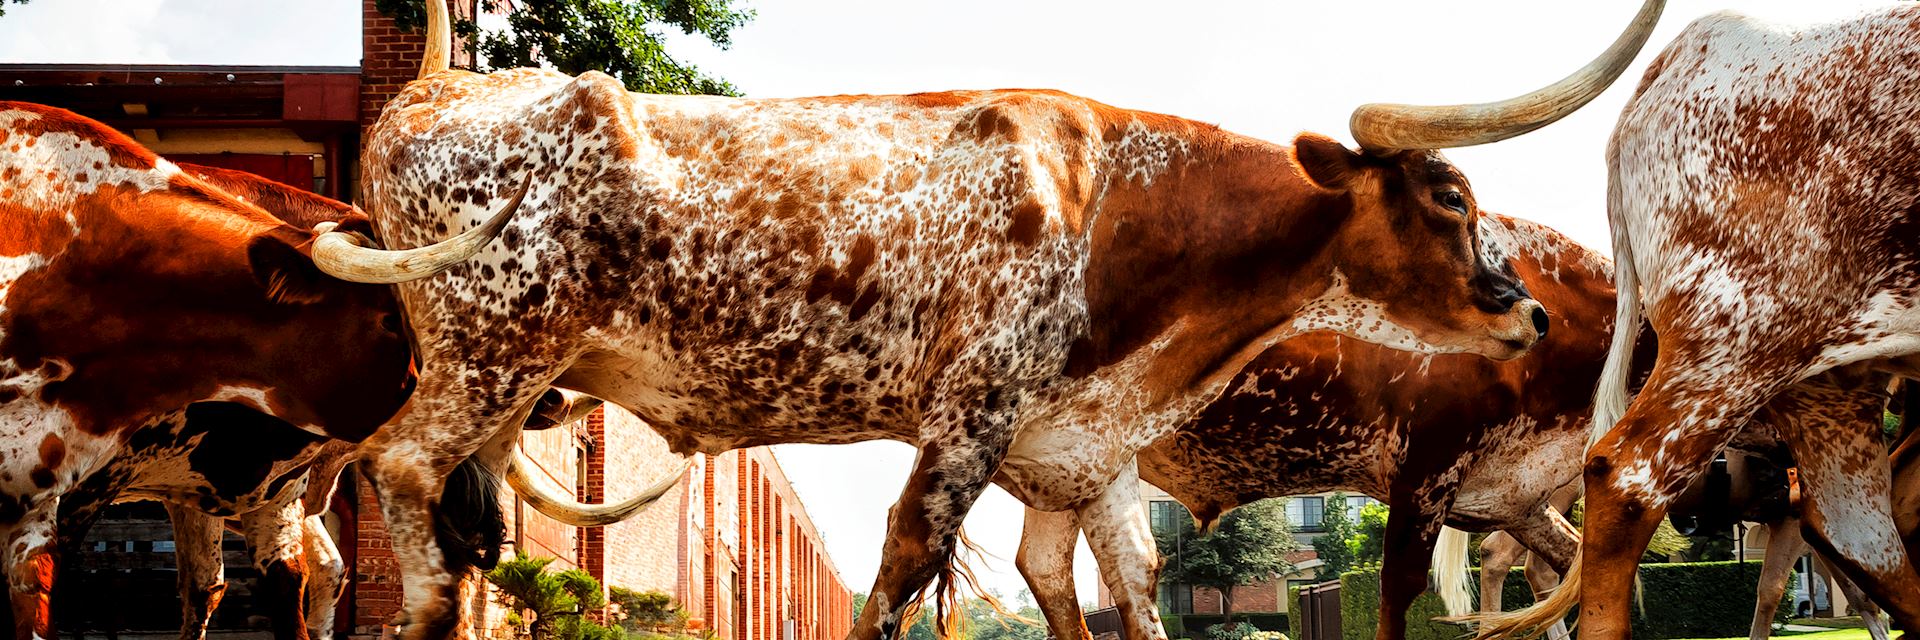 Longhorn cattle in Fort Worth